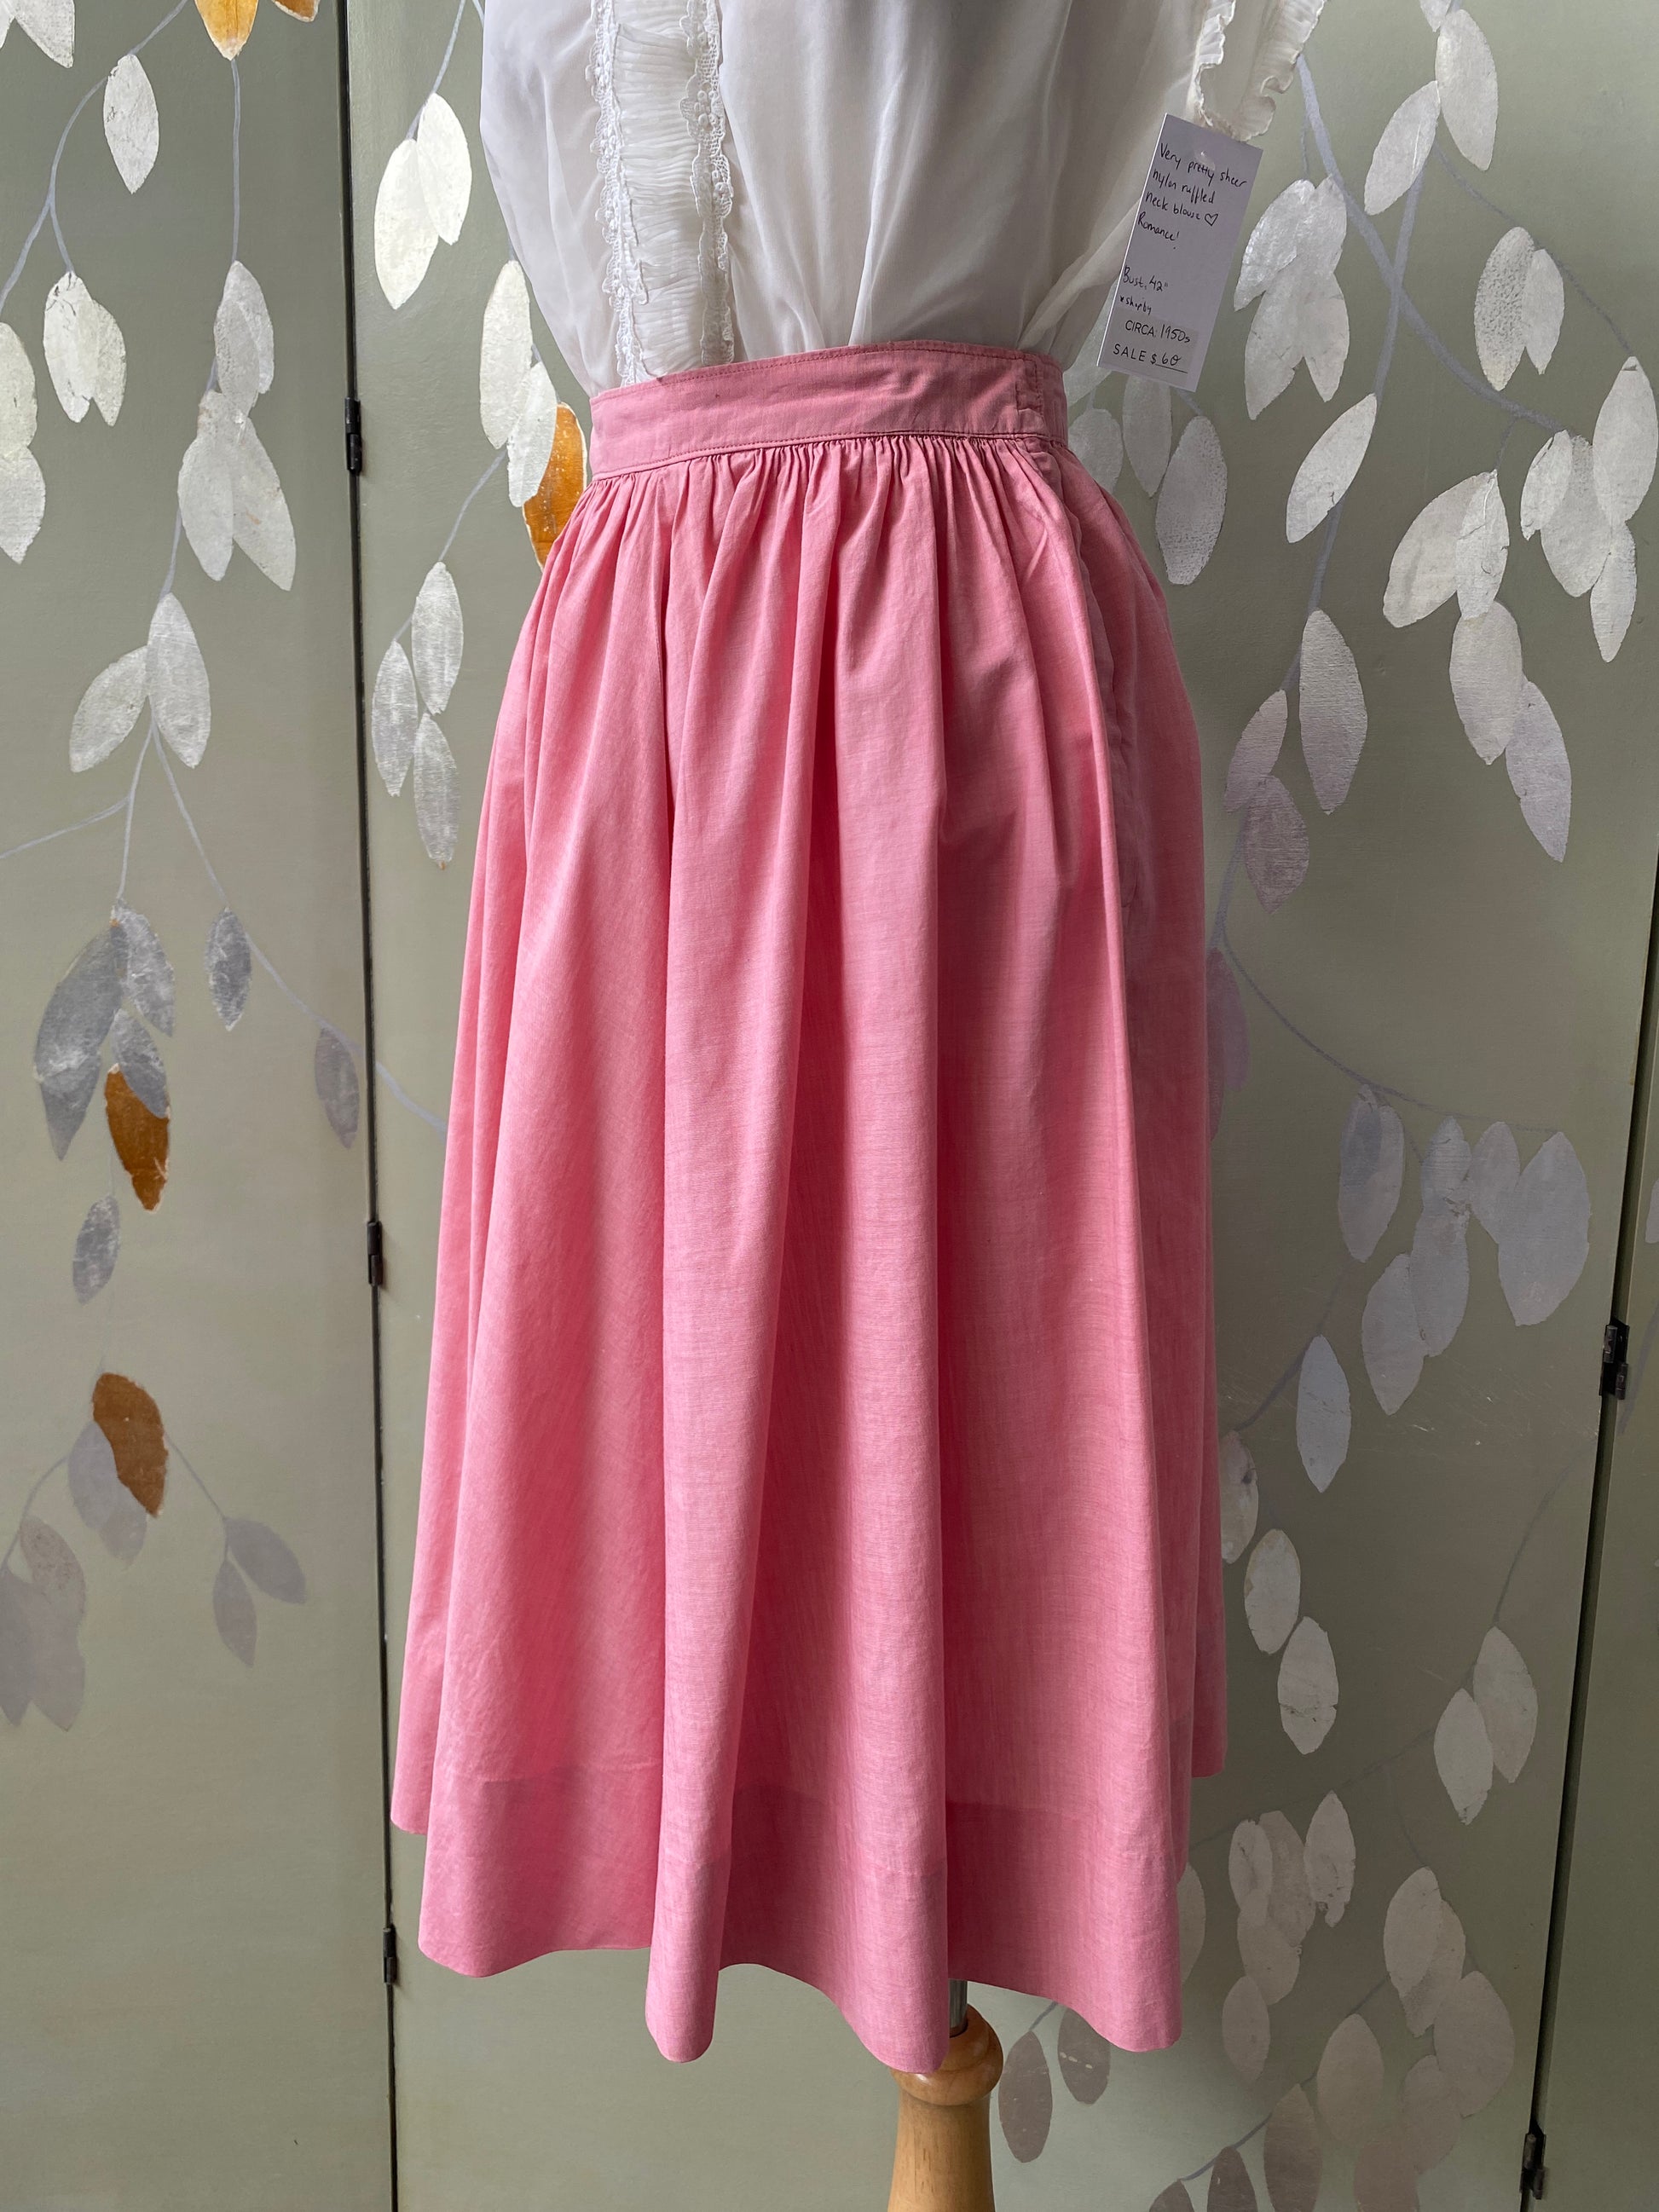 Vintage 1950s Pink Cotton Gathered Skirt, W24"